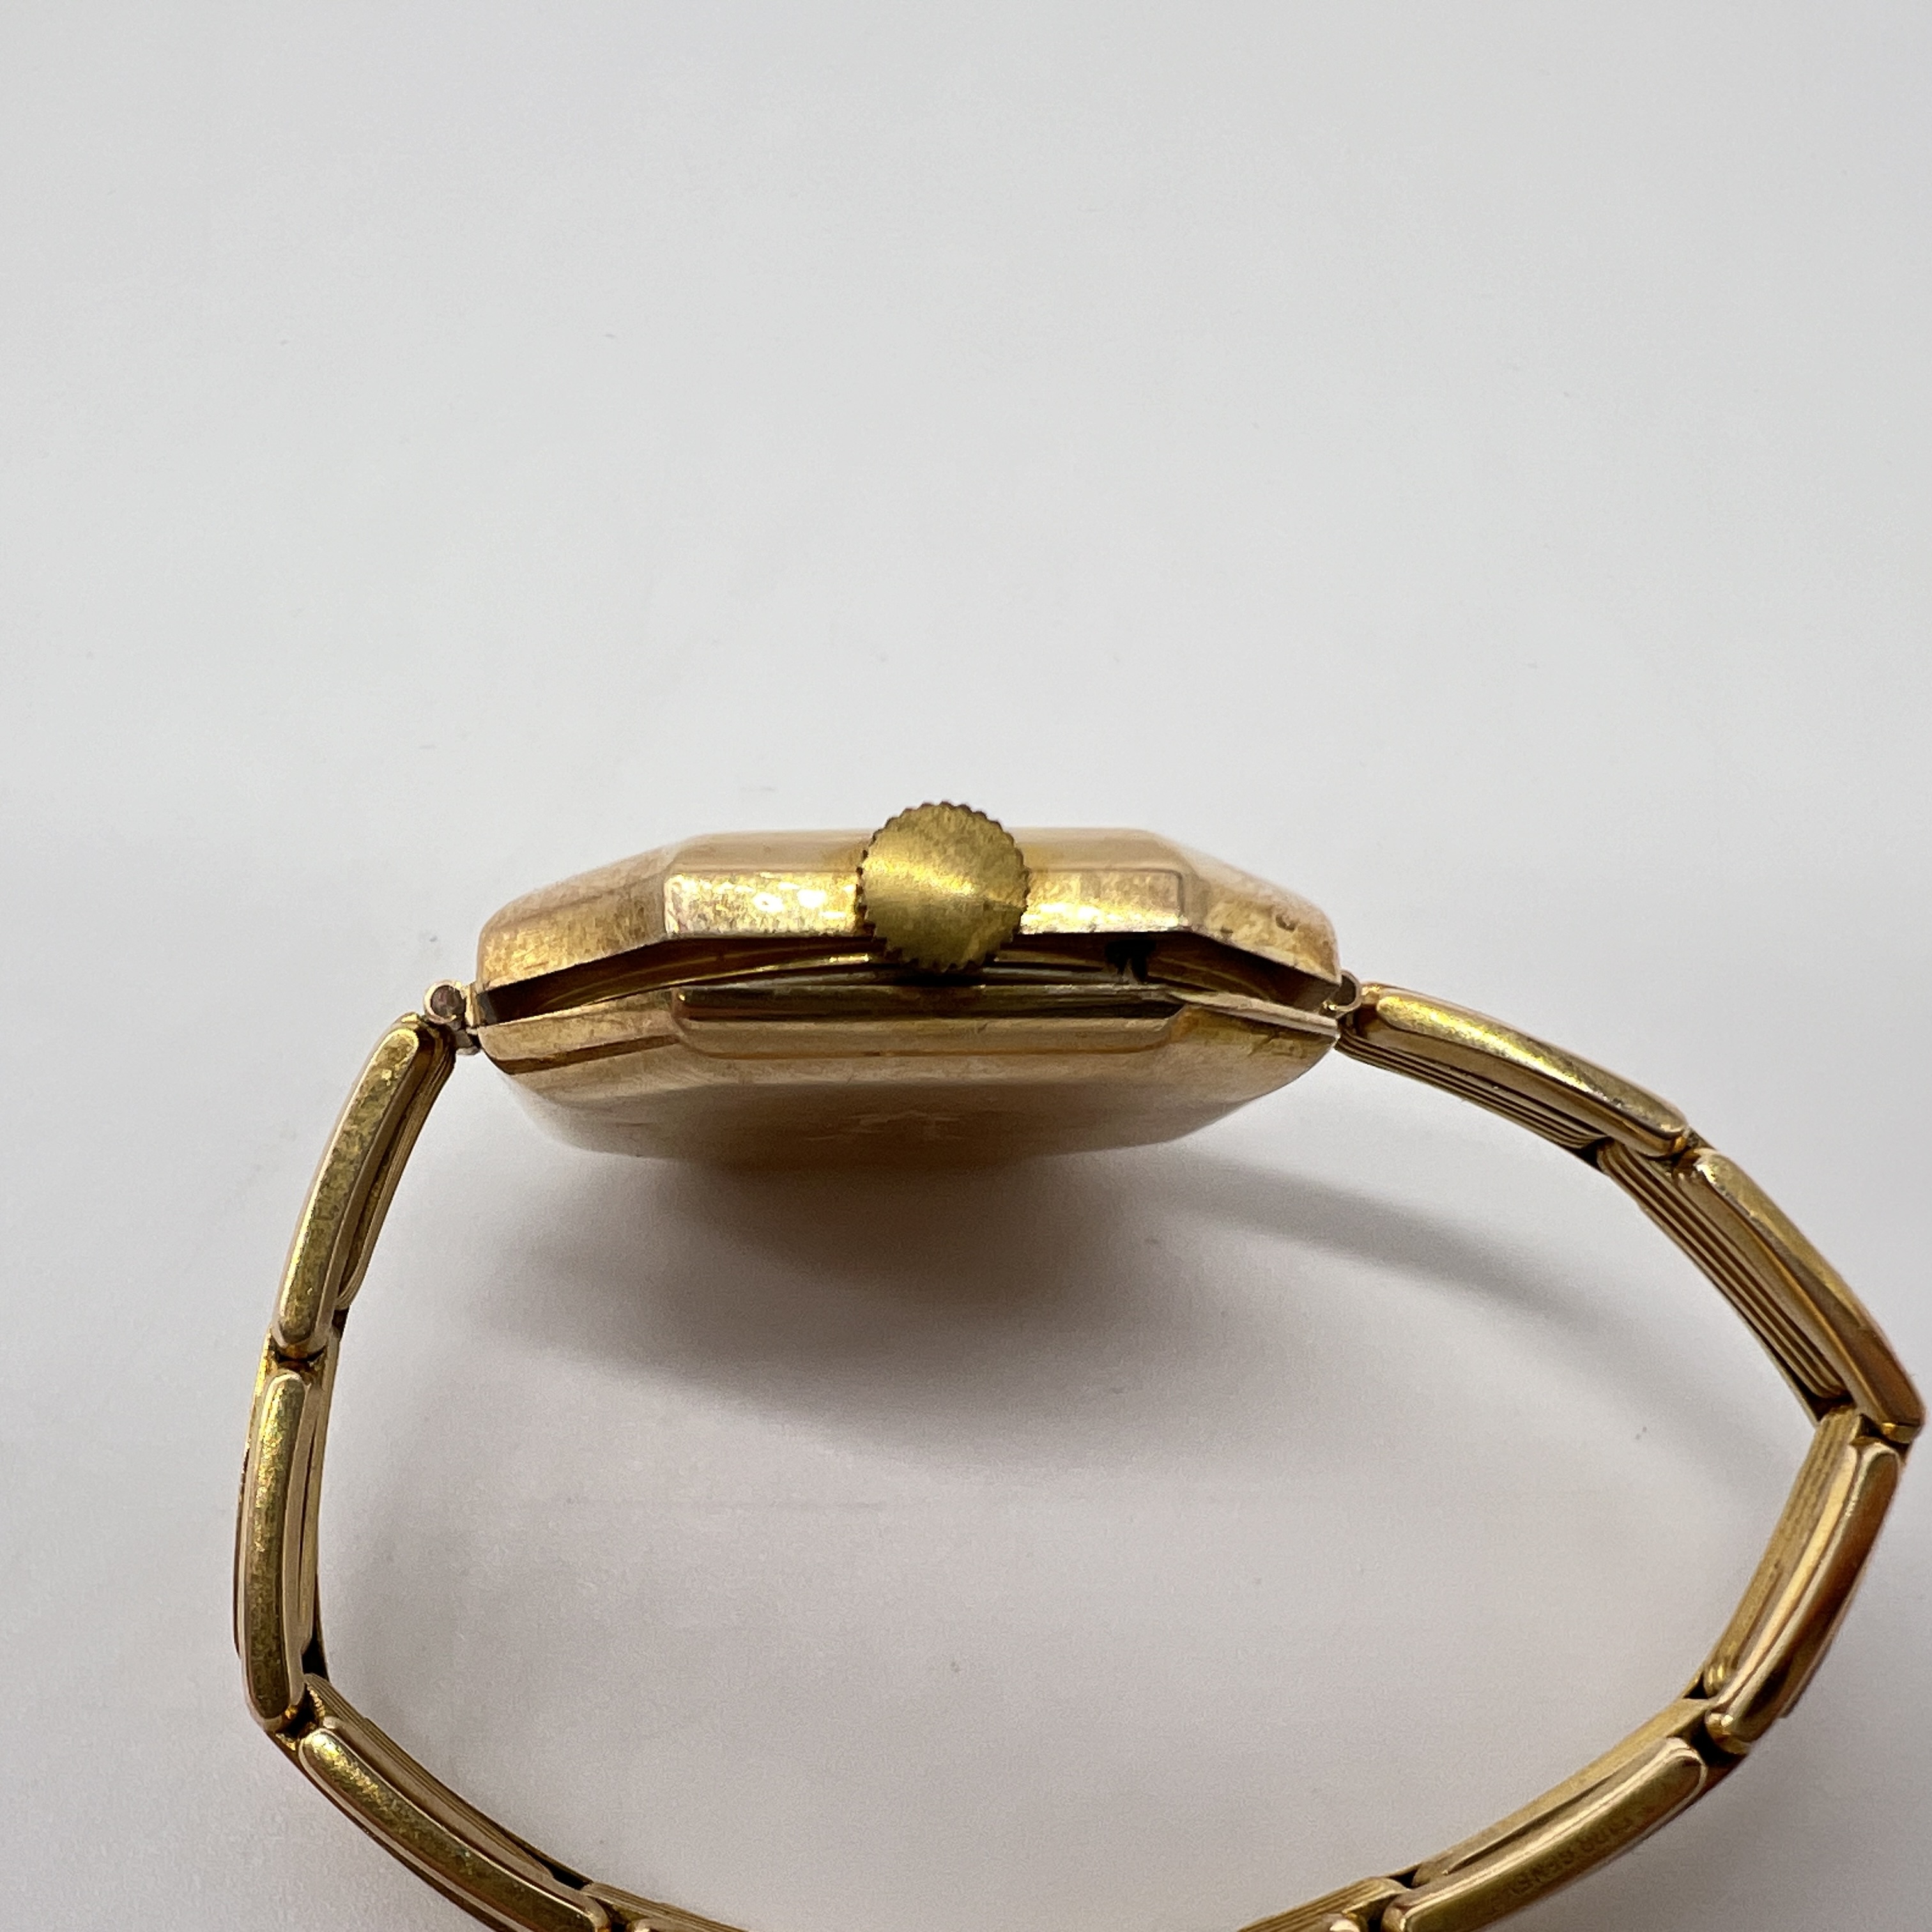 A 14ct yellow gold vintage watch - Image 3 of 5